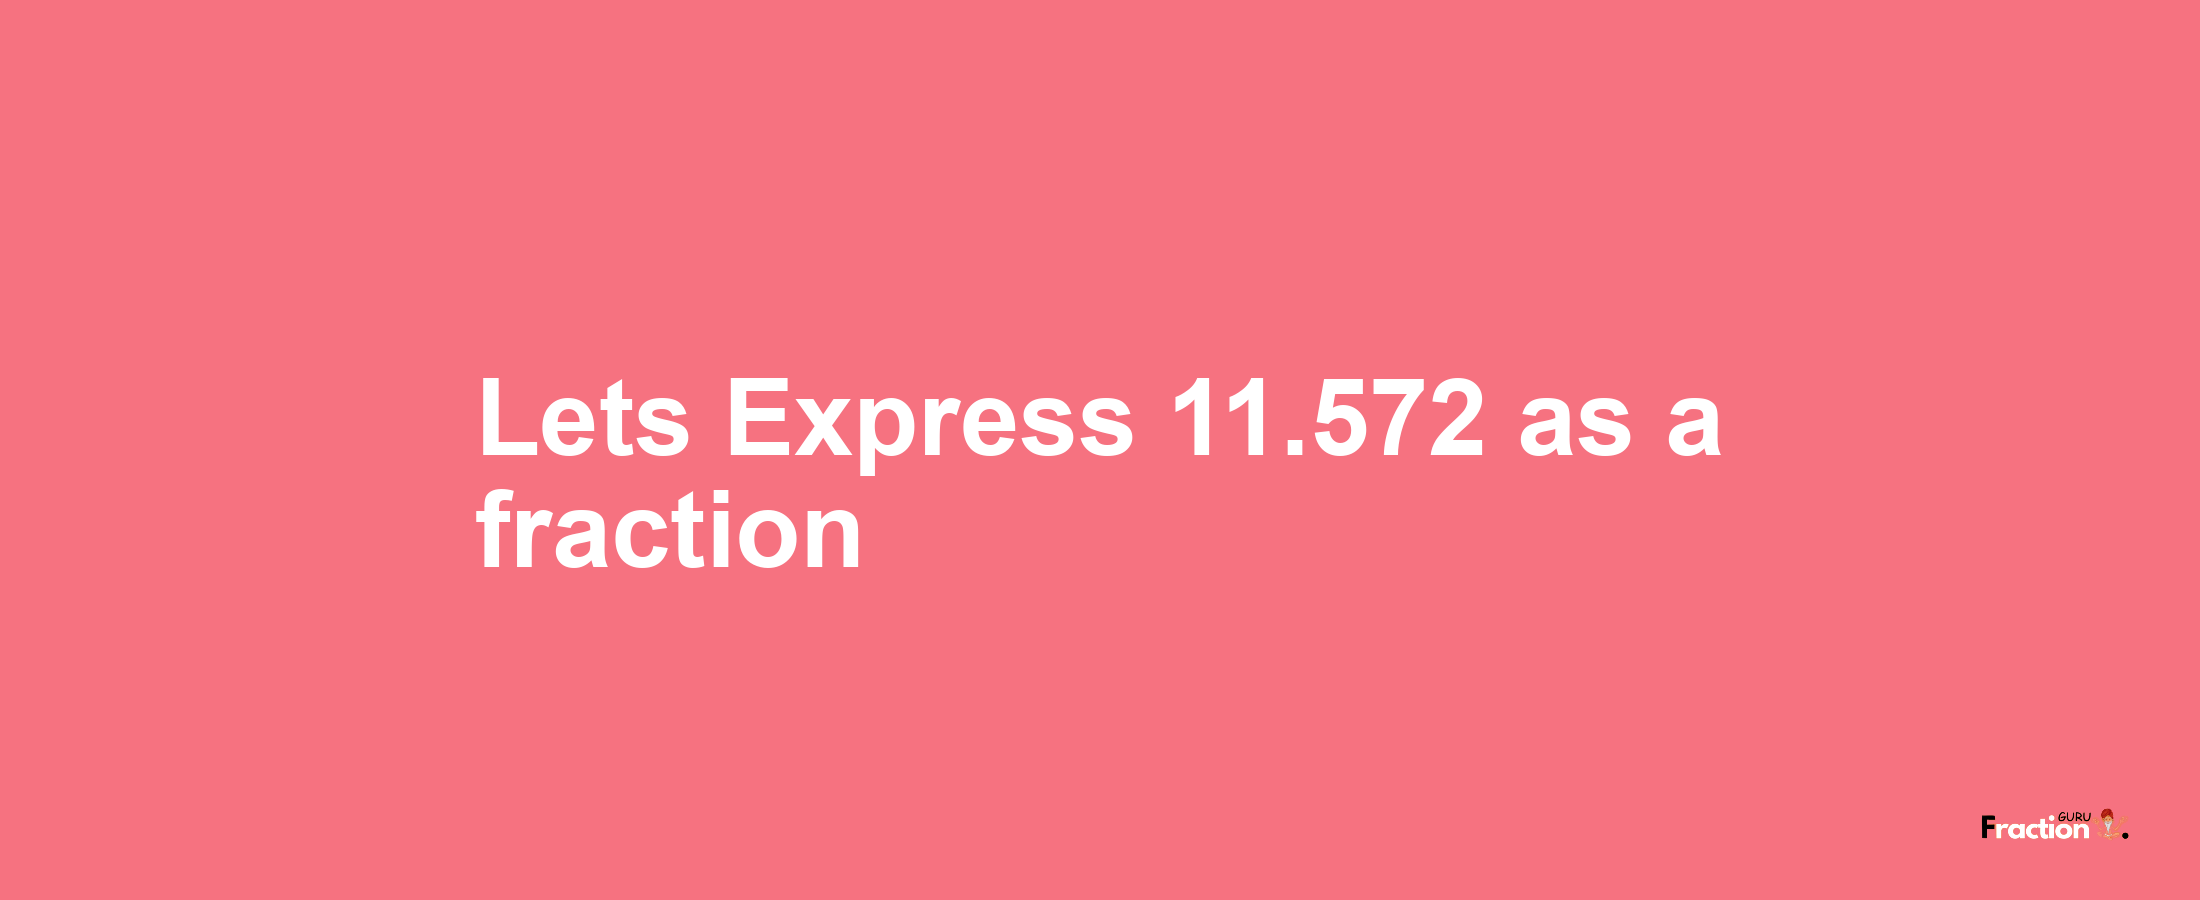 Lets Express 11.572 as afraction